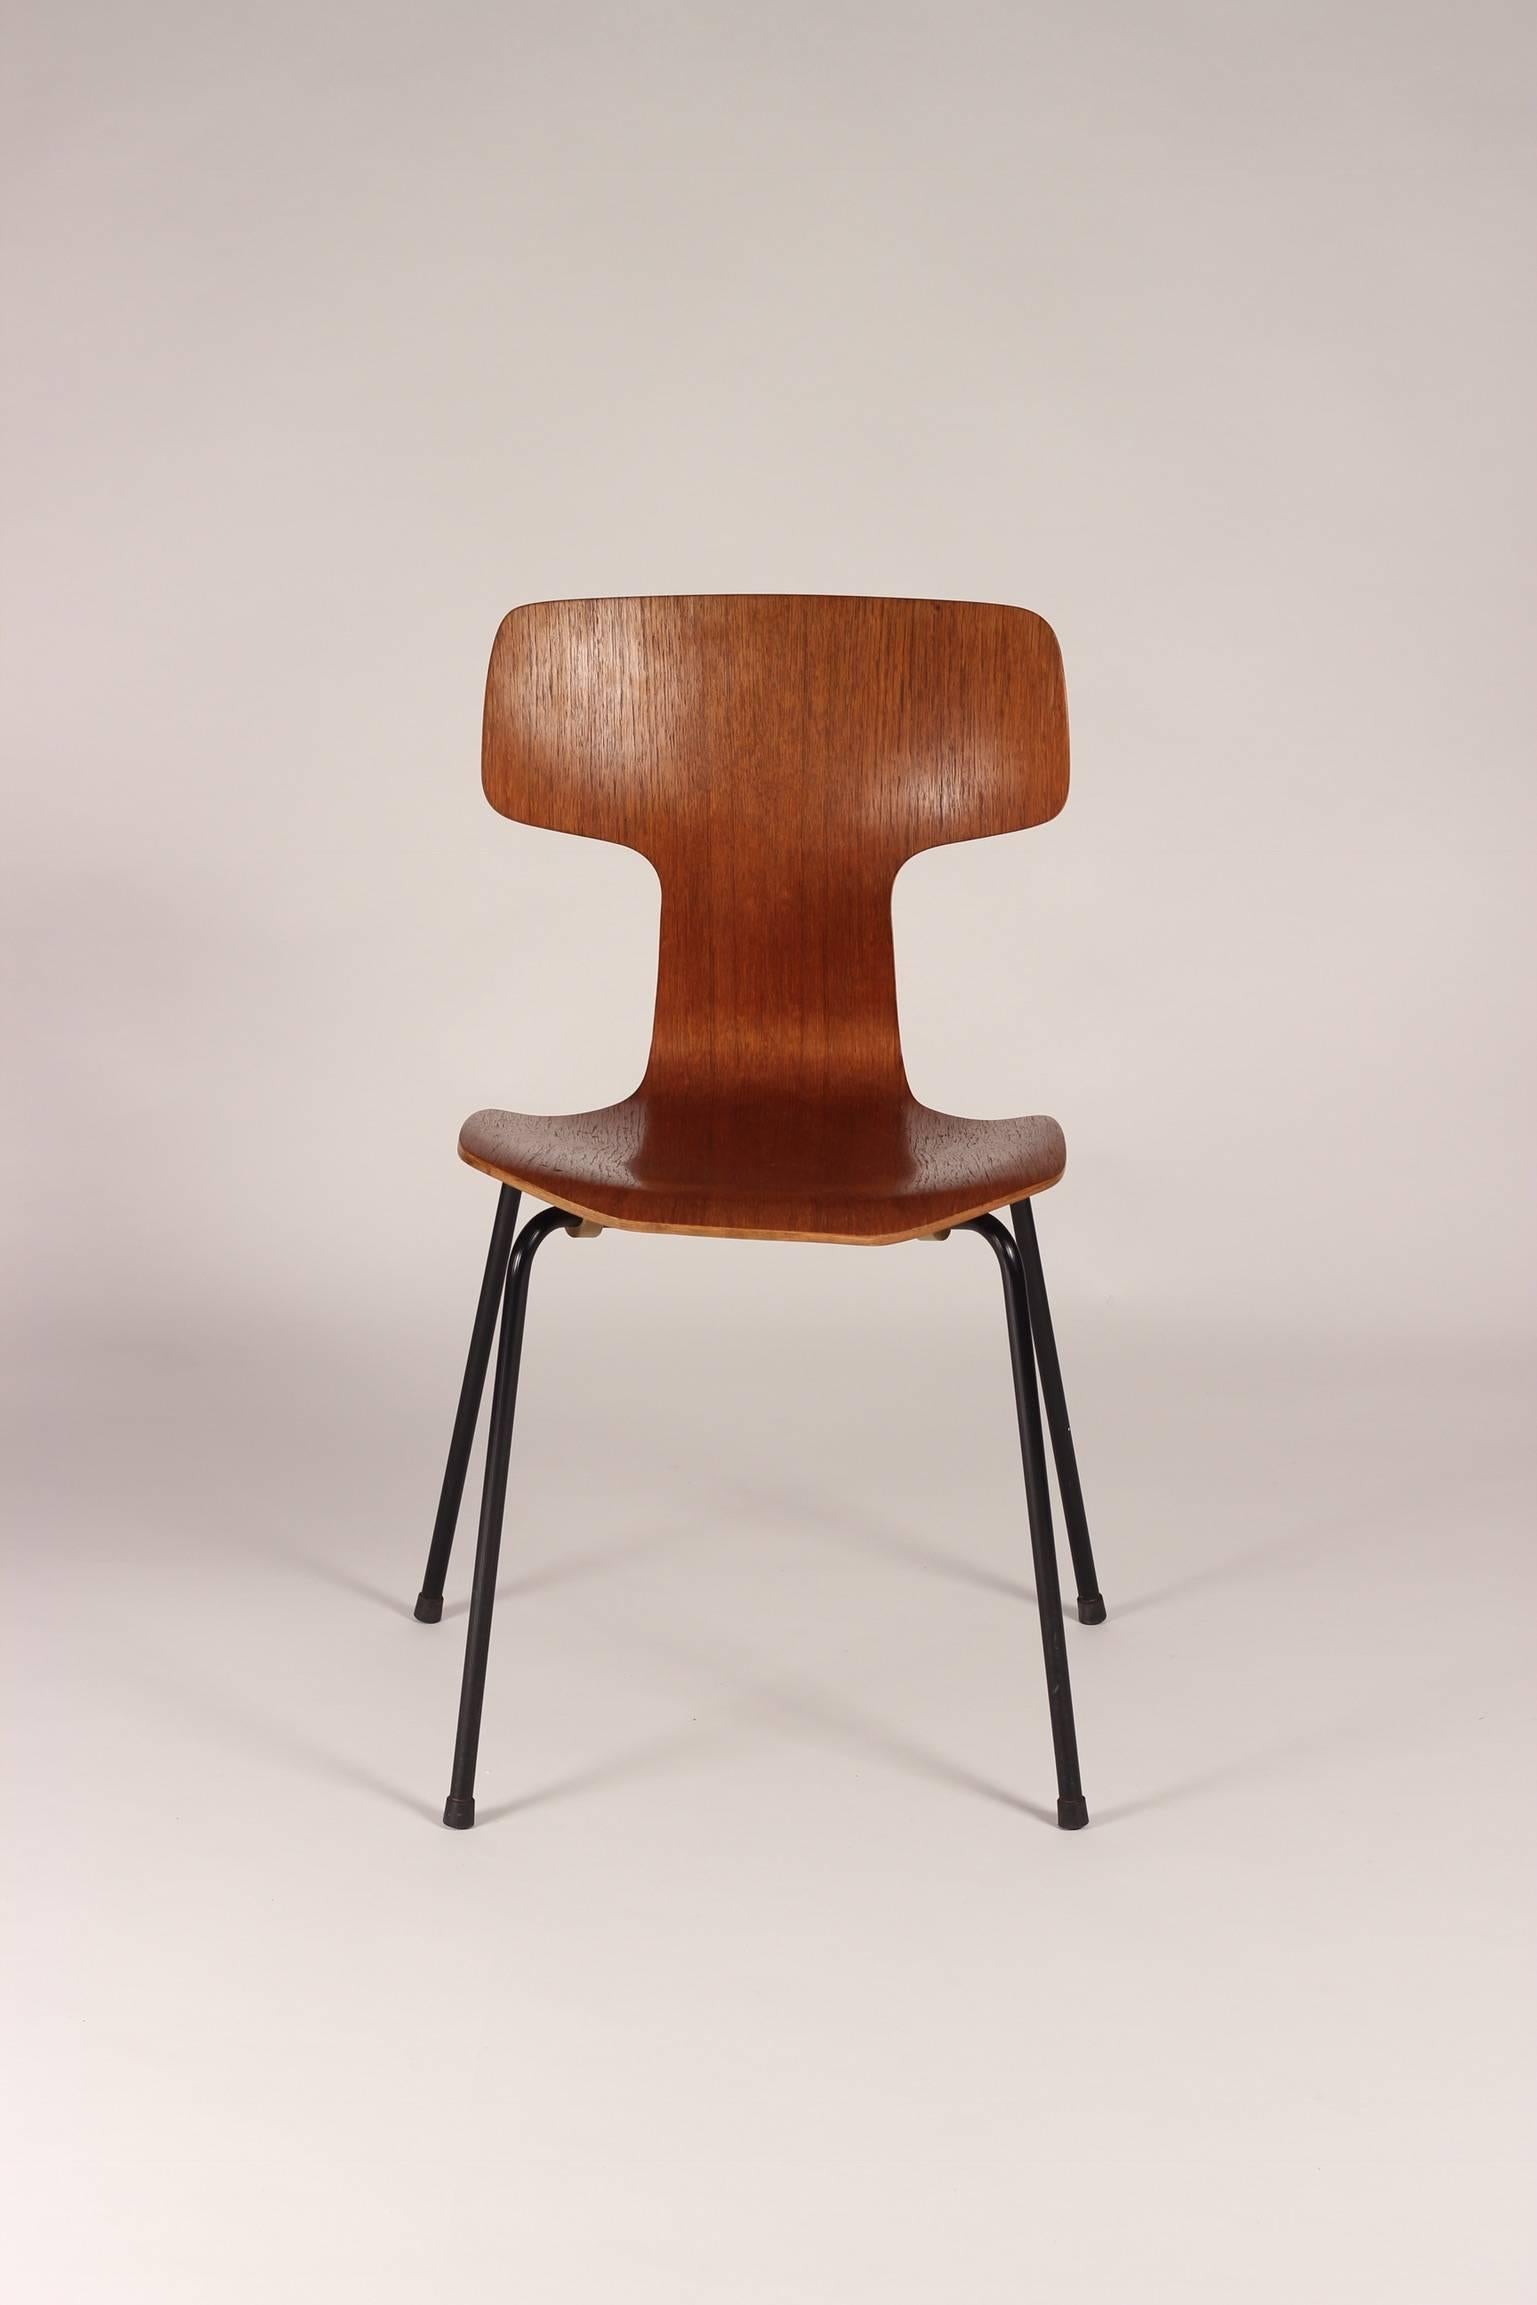 Mid-20th Century Mid Century Modern Set of 8 Model 3103 T-Chairs Designed by Arne Jacobsen